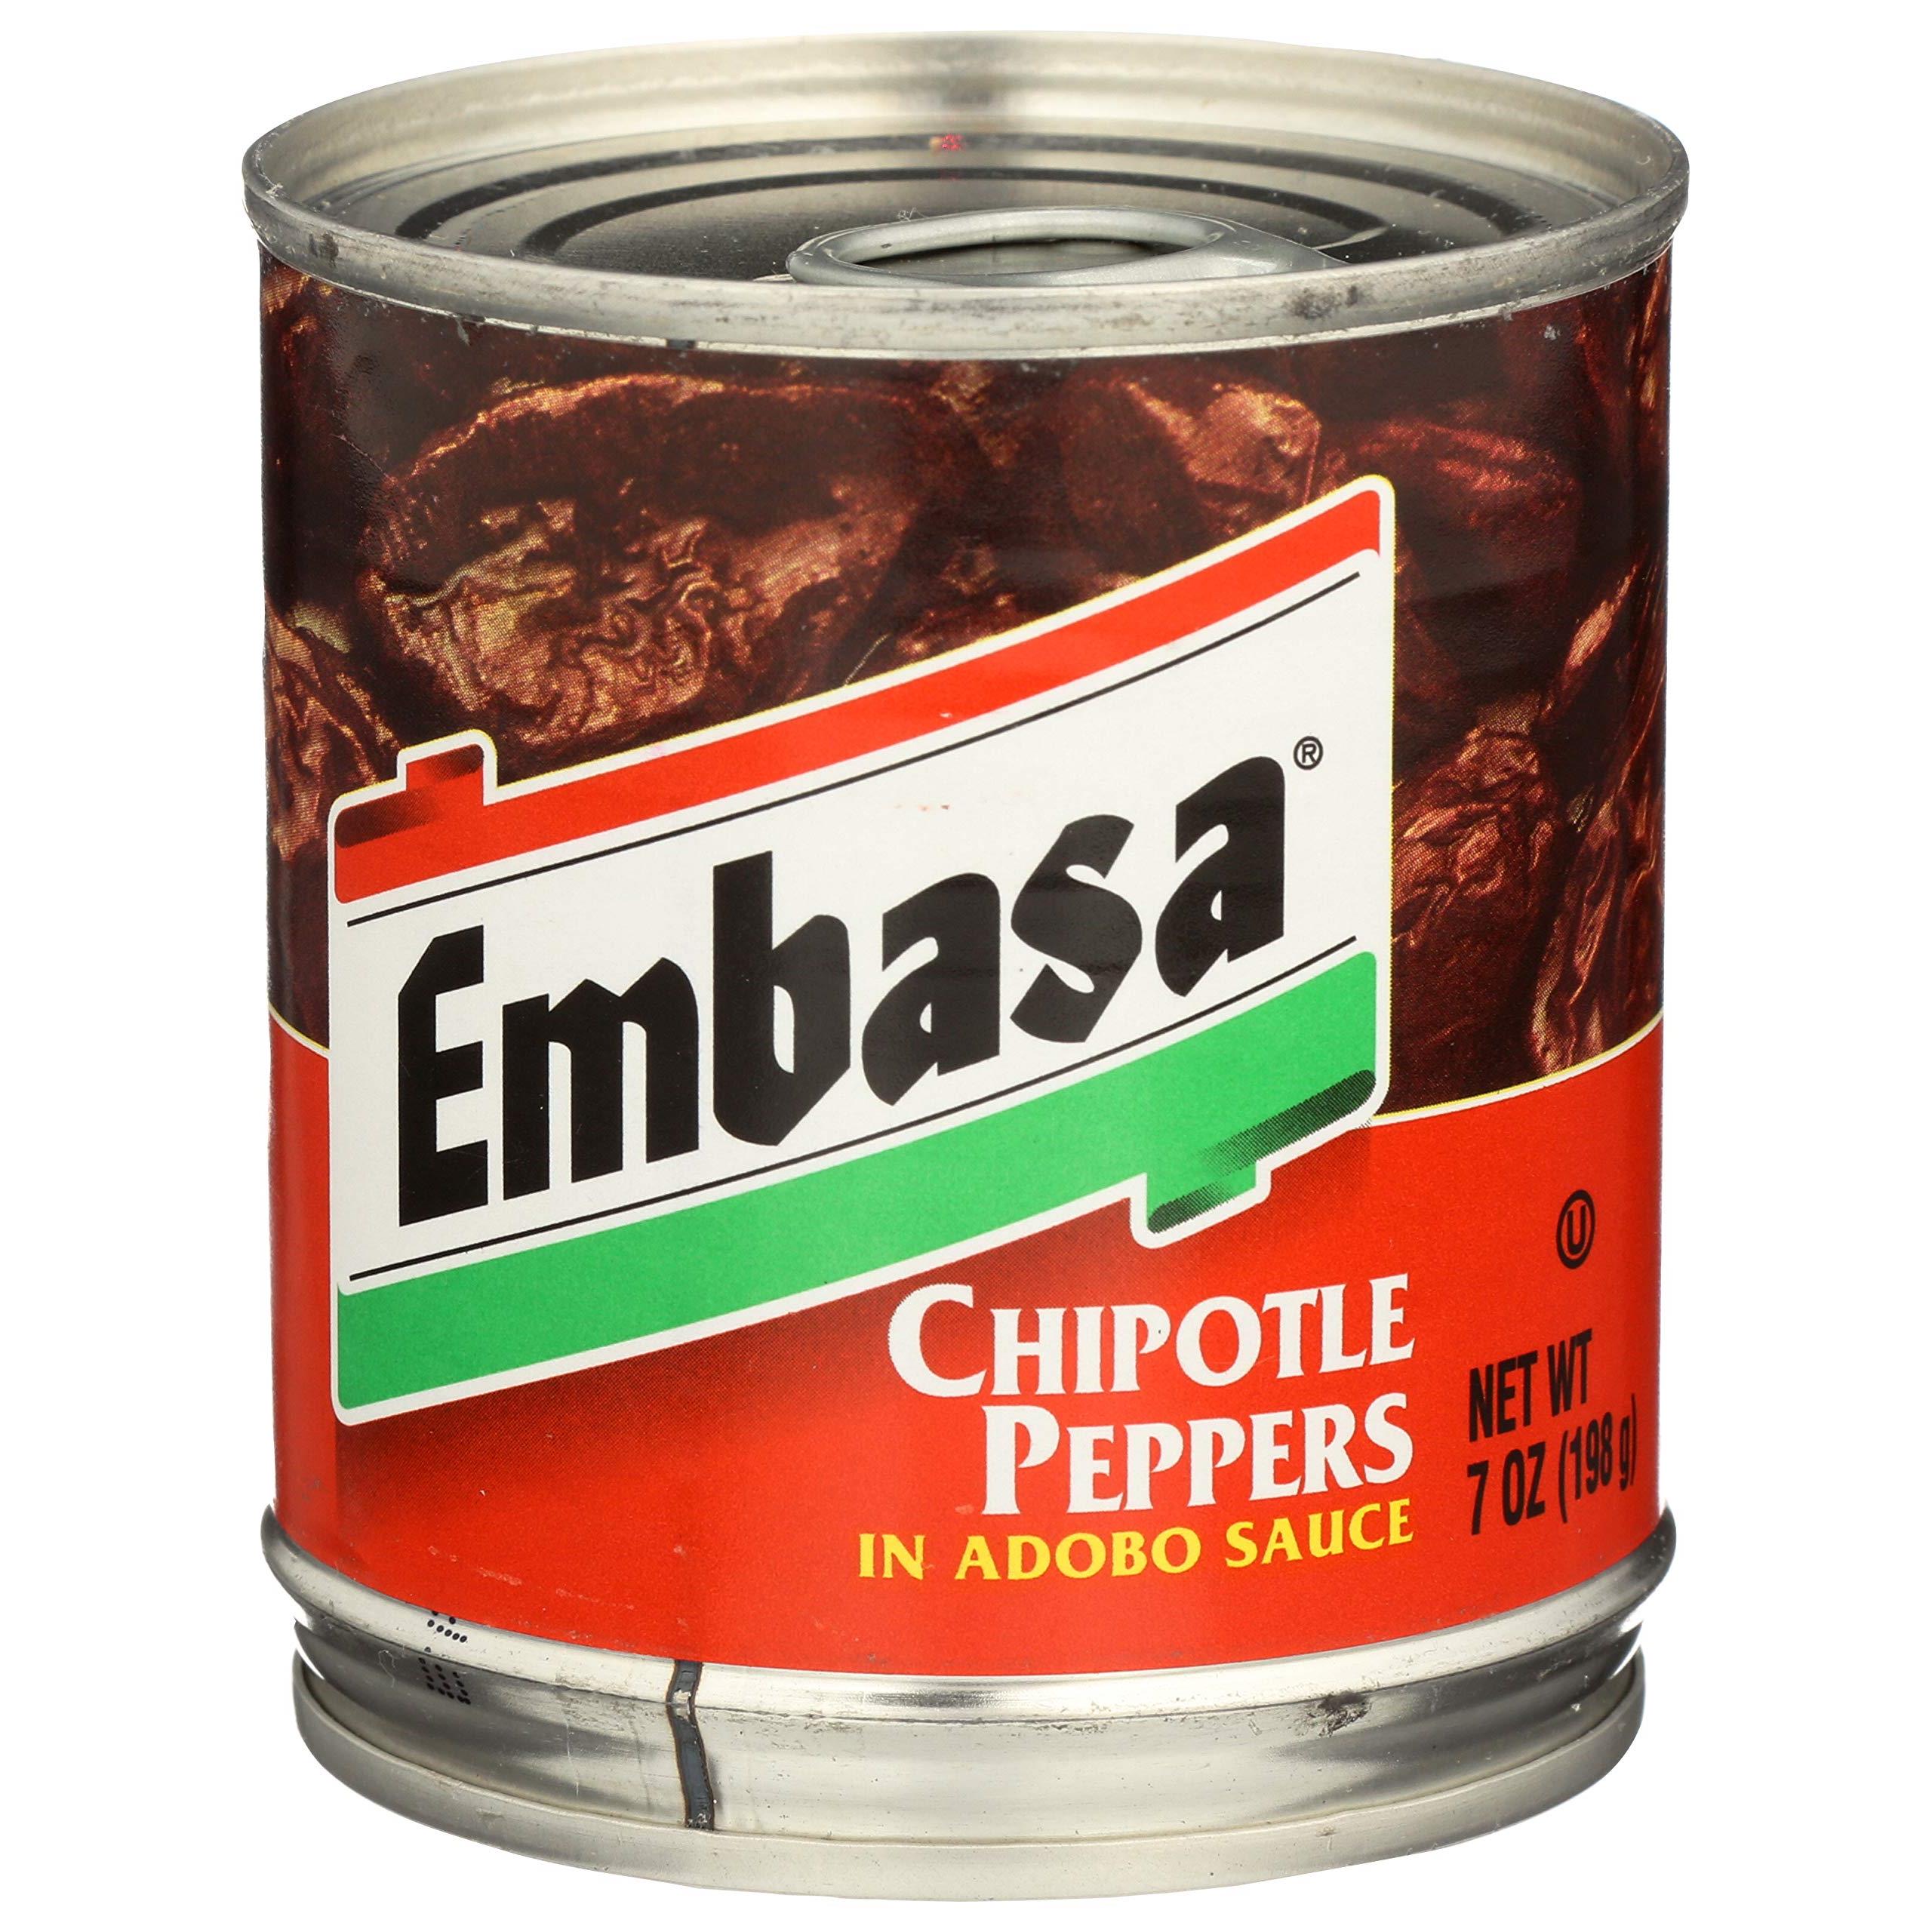 Embasa Chipotle Peppers in Adobo Sauce, 7 oz, Pack of 2